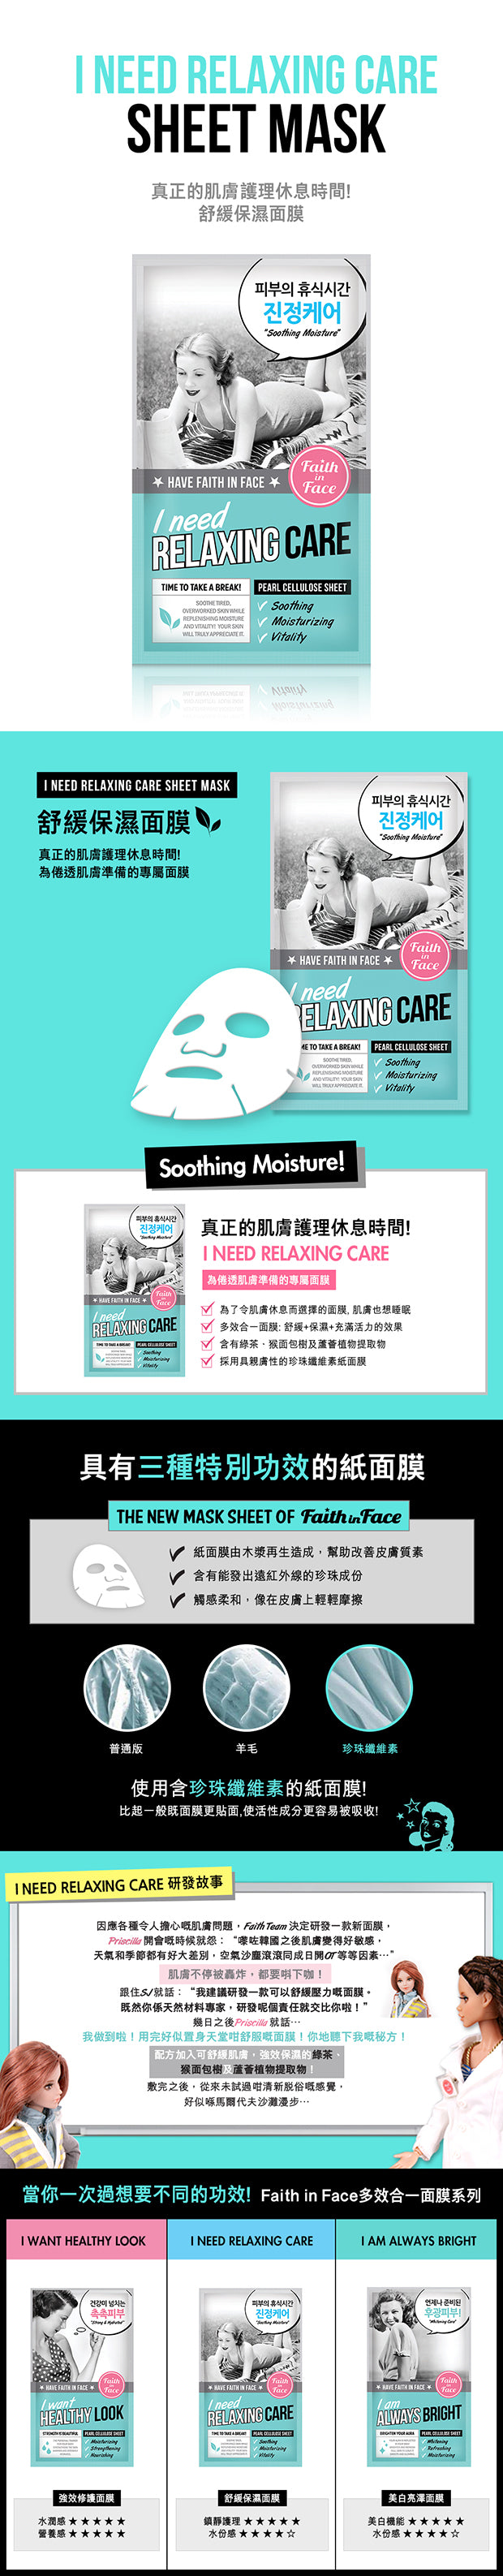 Faith in Face I Need Relaxing Care Sheet Mask 舒緩保濕珍珠纖維面膜